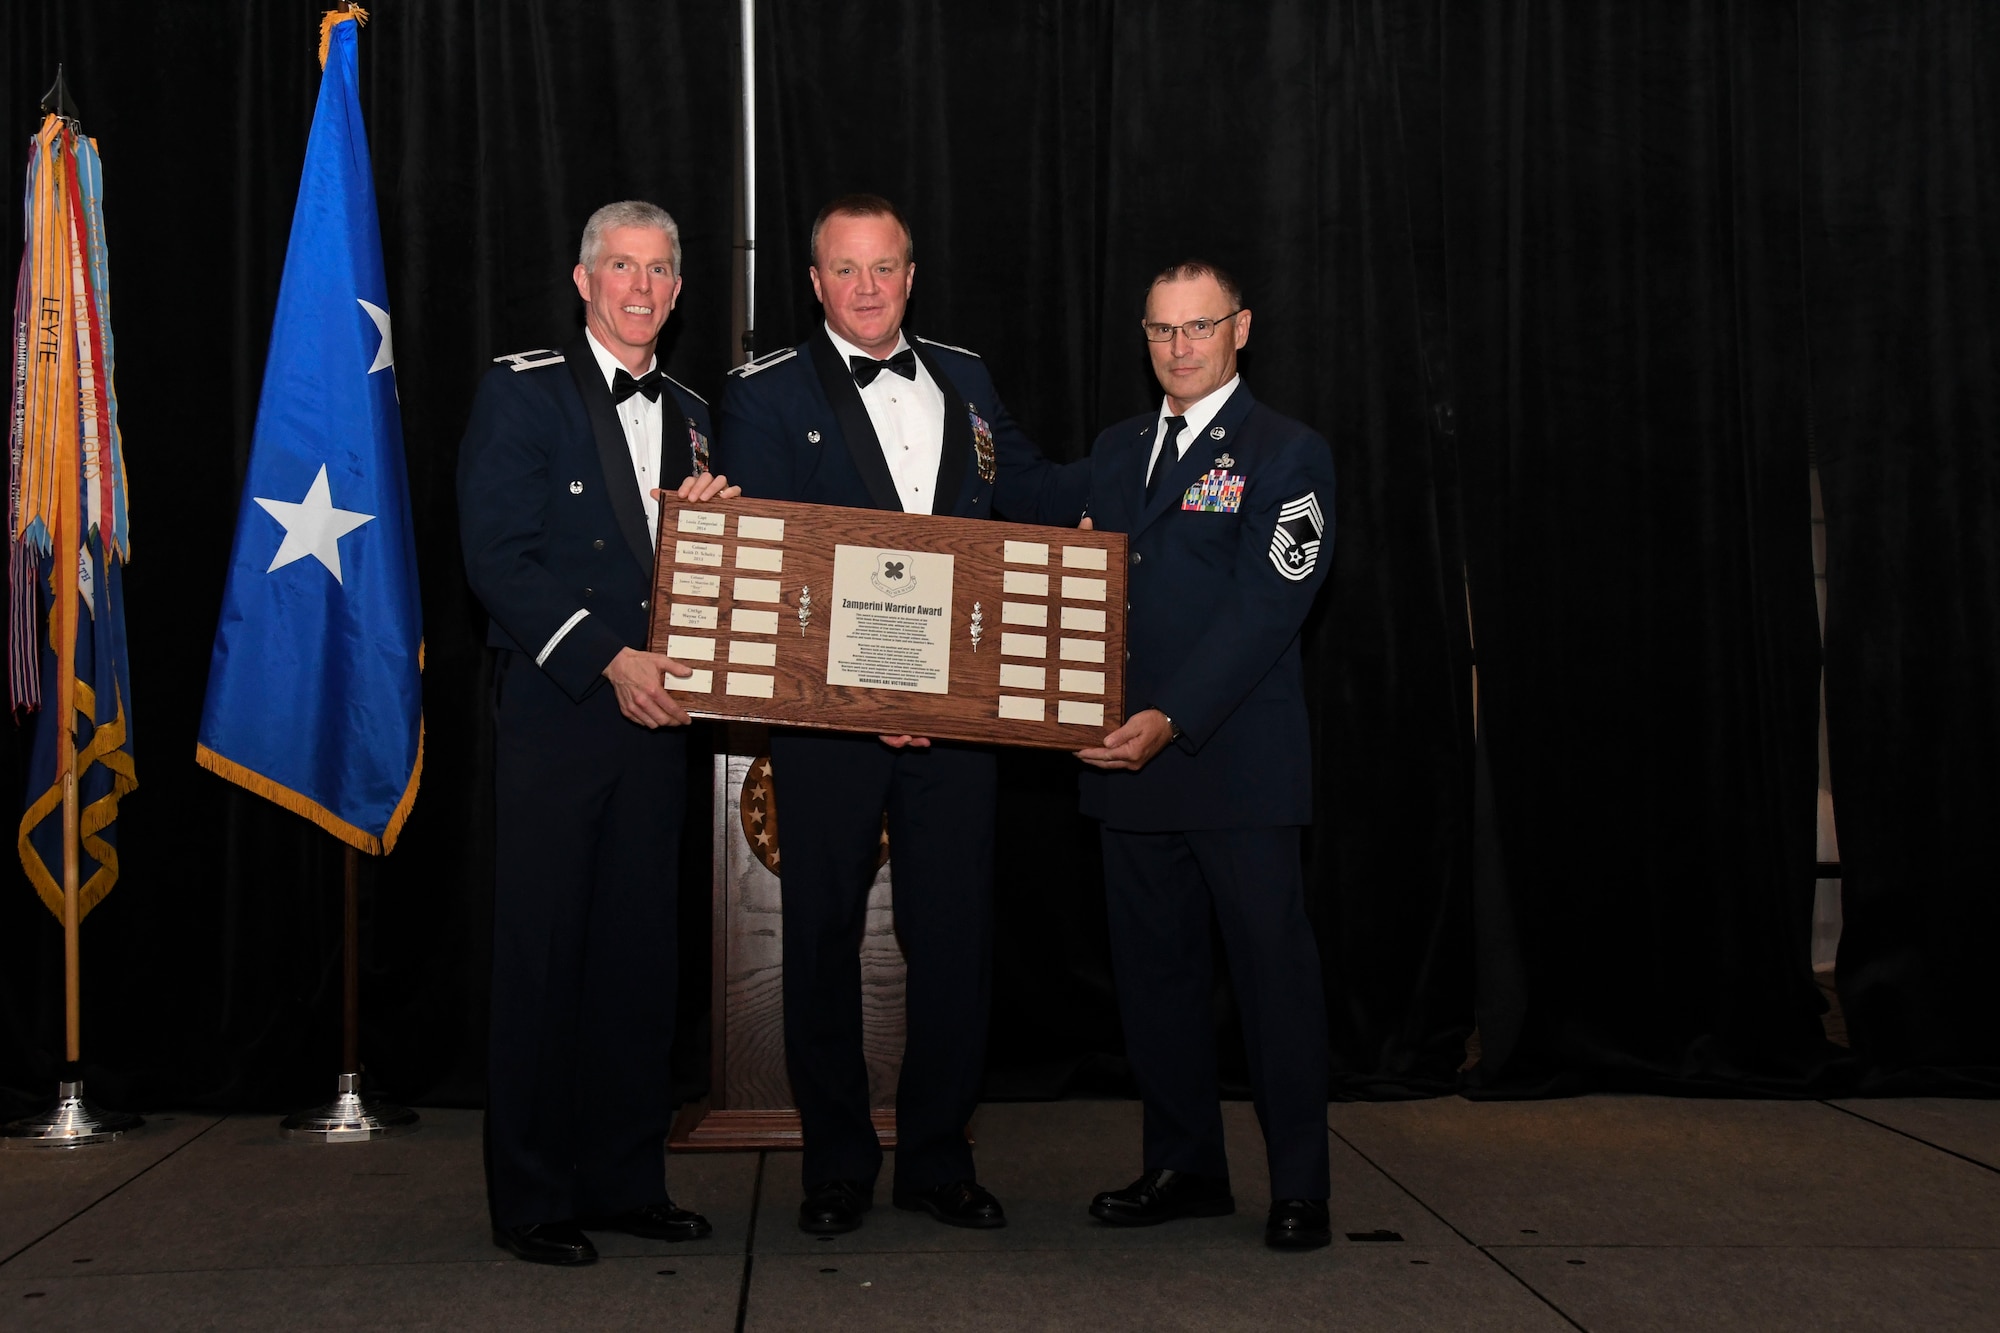 Col. Bruce R. Cox, 307th Bomb Wing commander, presents Col. James Morriss, 307th Bomb Wing vice commander, and Chief Master Sgt. Vernon Cox, 307th Maintenance Group, with the Zamperini Warrior Award during the 307th Bomb Wing’s 75th Anniversary and Awards Gala at the Shreveport Convention Center April 1, 2017. (U.S. Air Force photo by Staff Sgt. Callie Ware/Released)